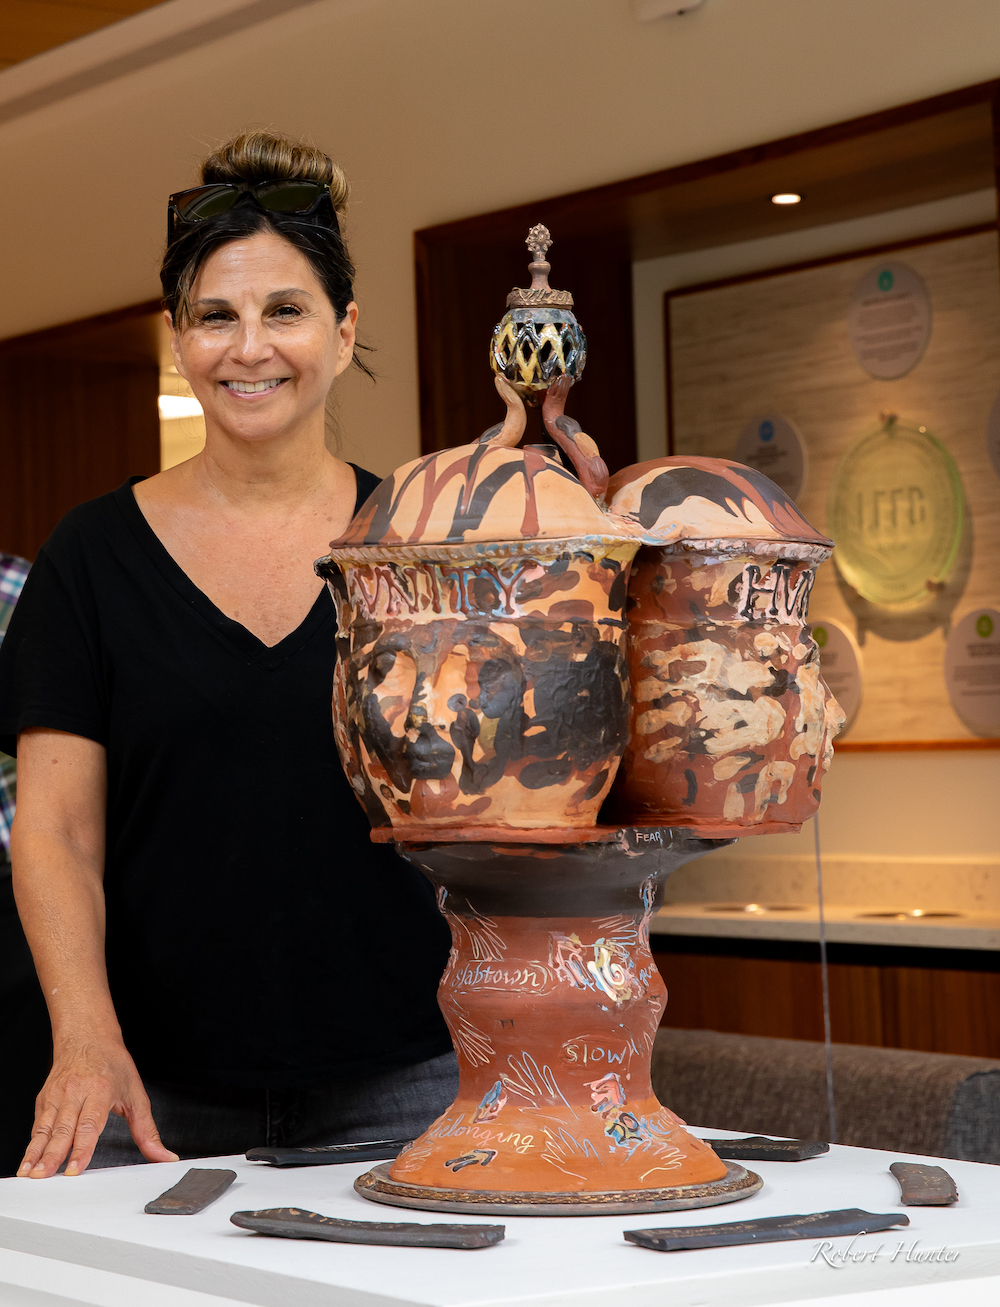 Erickson with the completed "Unity" ceramic (photo by Robert Hunter M.A. 87)